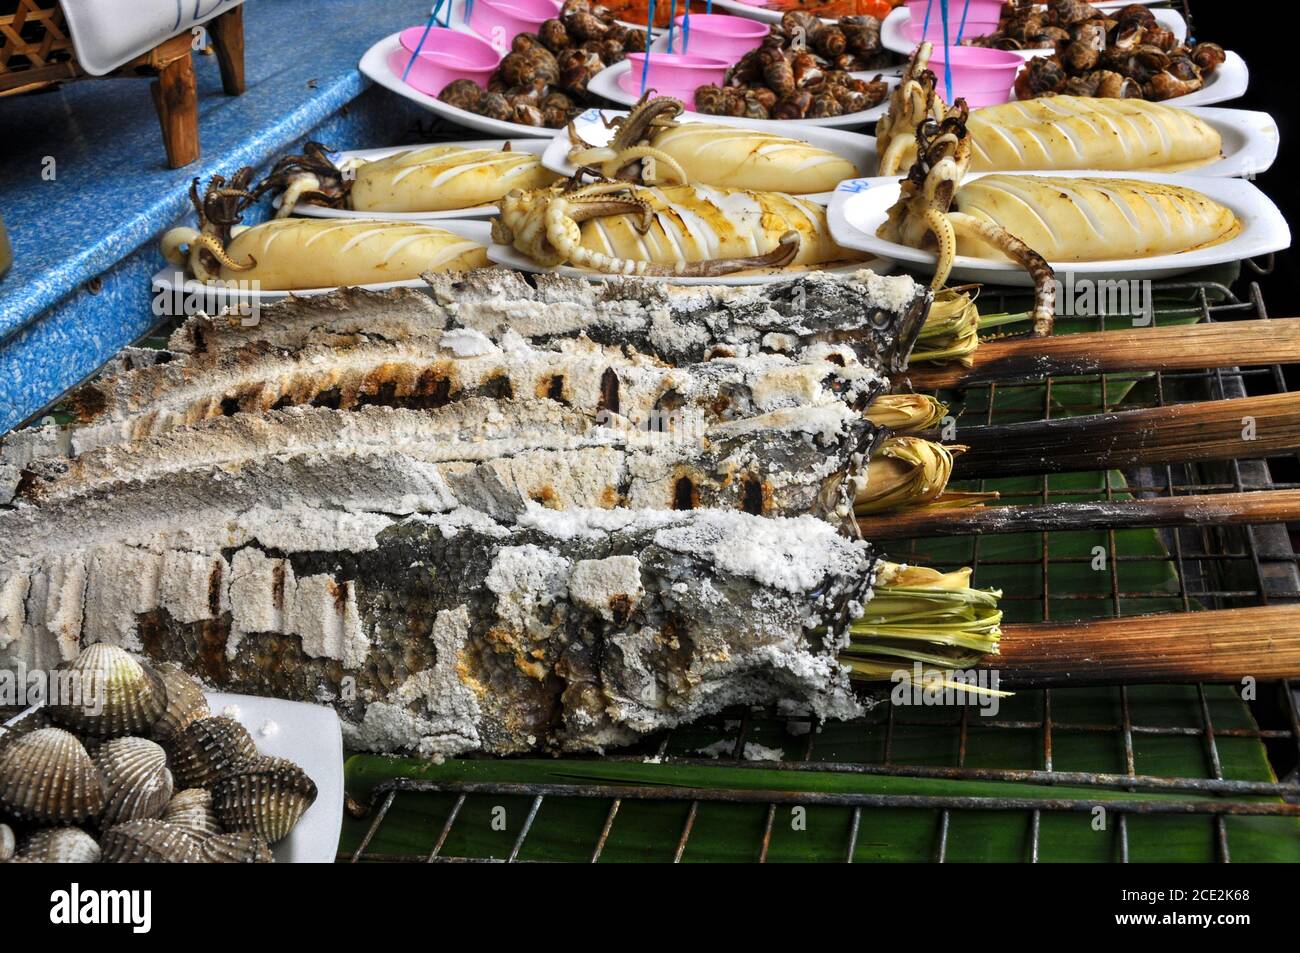 Close up of A spread of seafood on an outdoor grill displaying Thai delicacies of squid and more seafood at the Ayothaya Floating Market, in Thailand Stock Photo